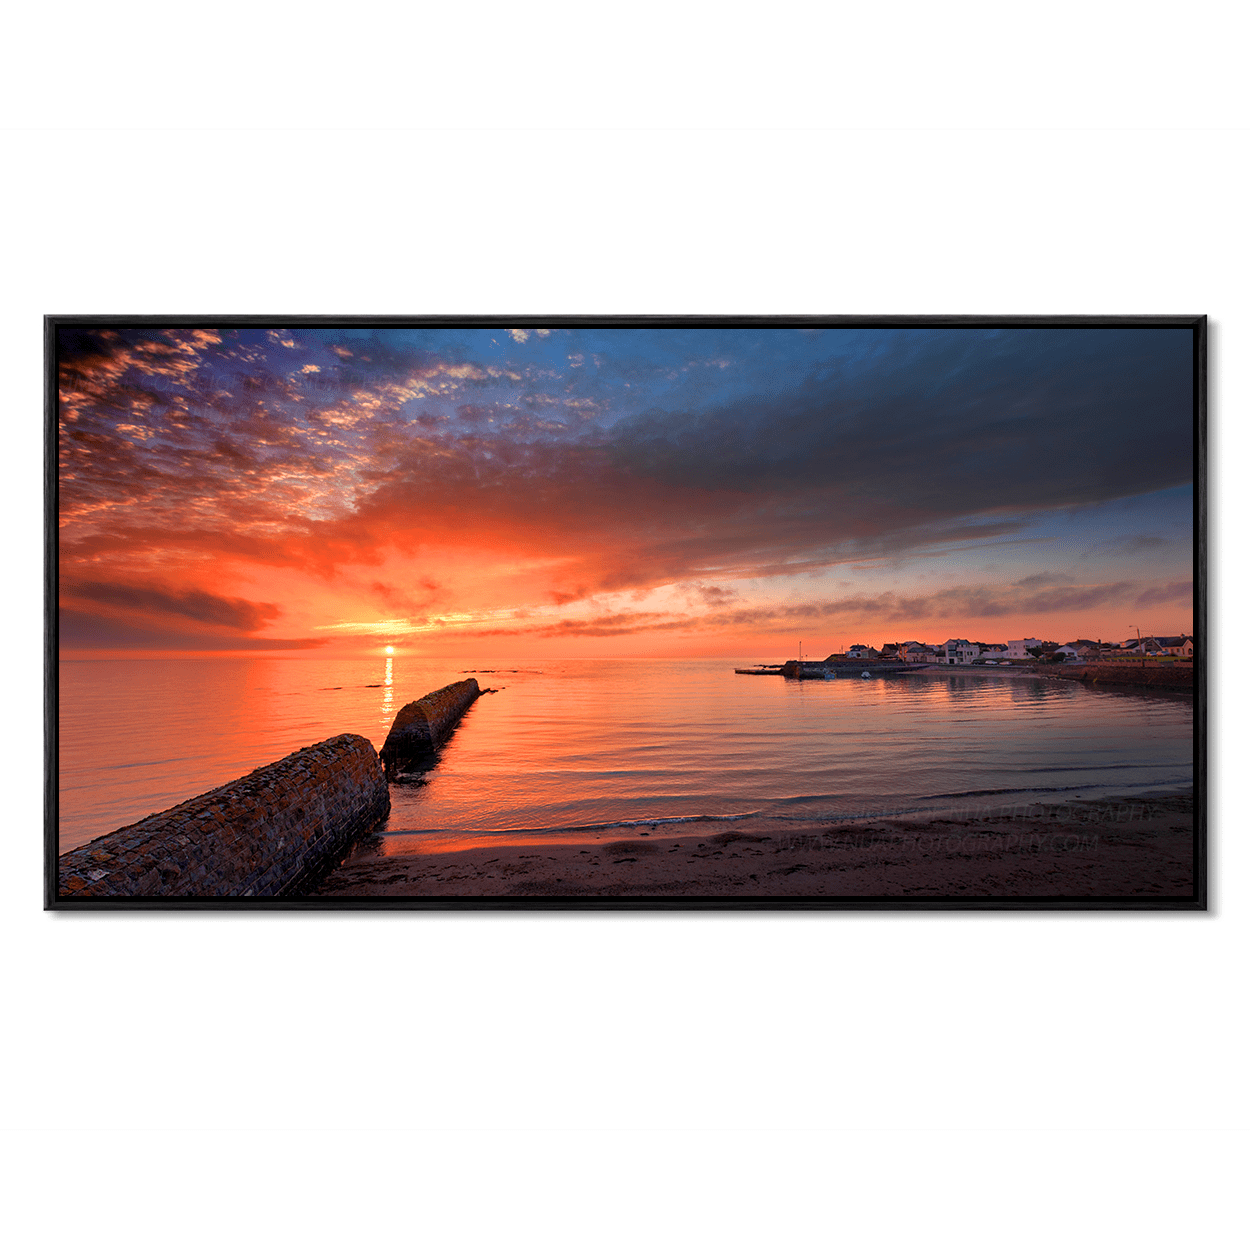 Nua Photography Limited Edition The Range Wall & Rush Harbour at Sunrise Pano